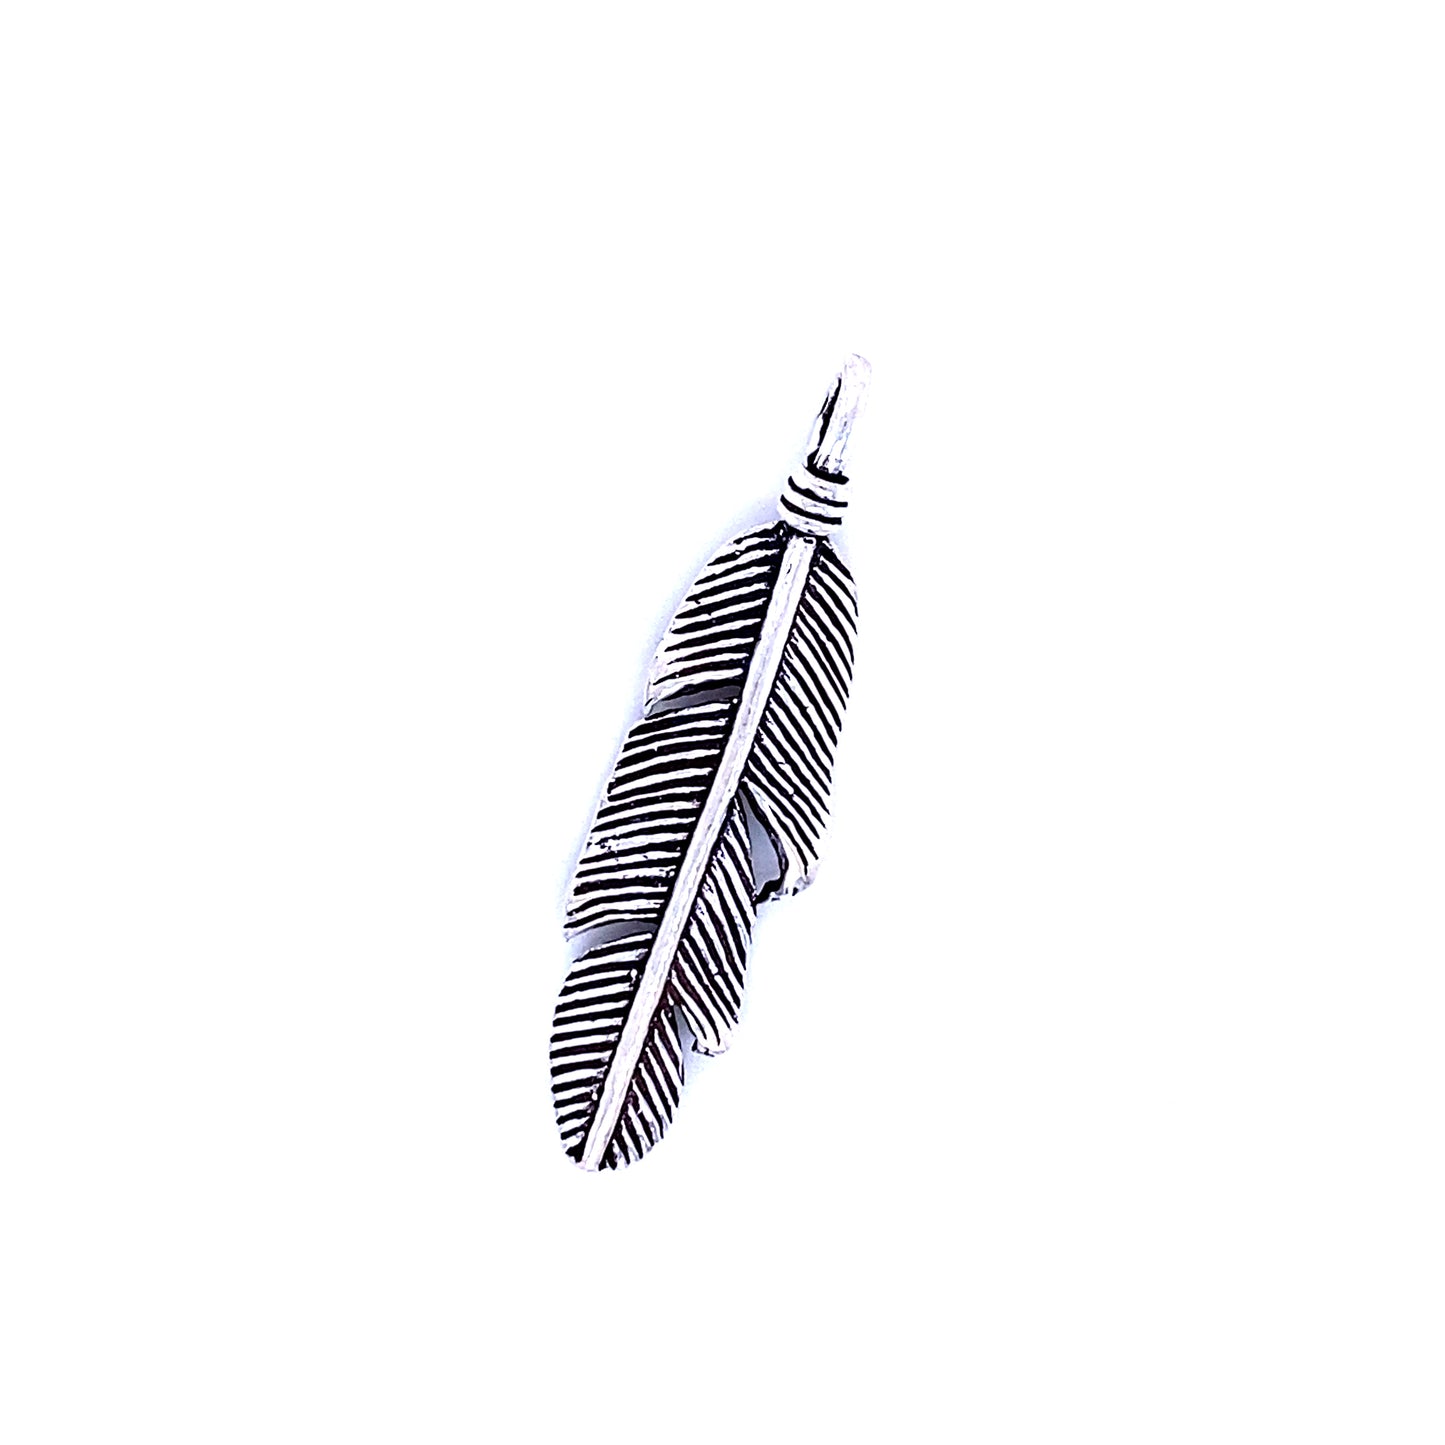 A Super Silver Rustic Feather Pendant necklace on a white background.